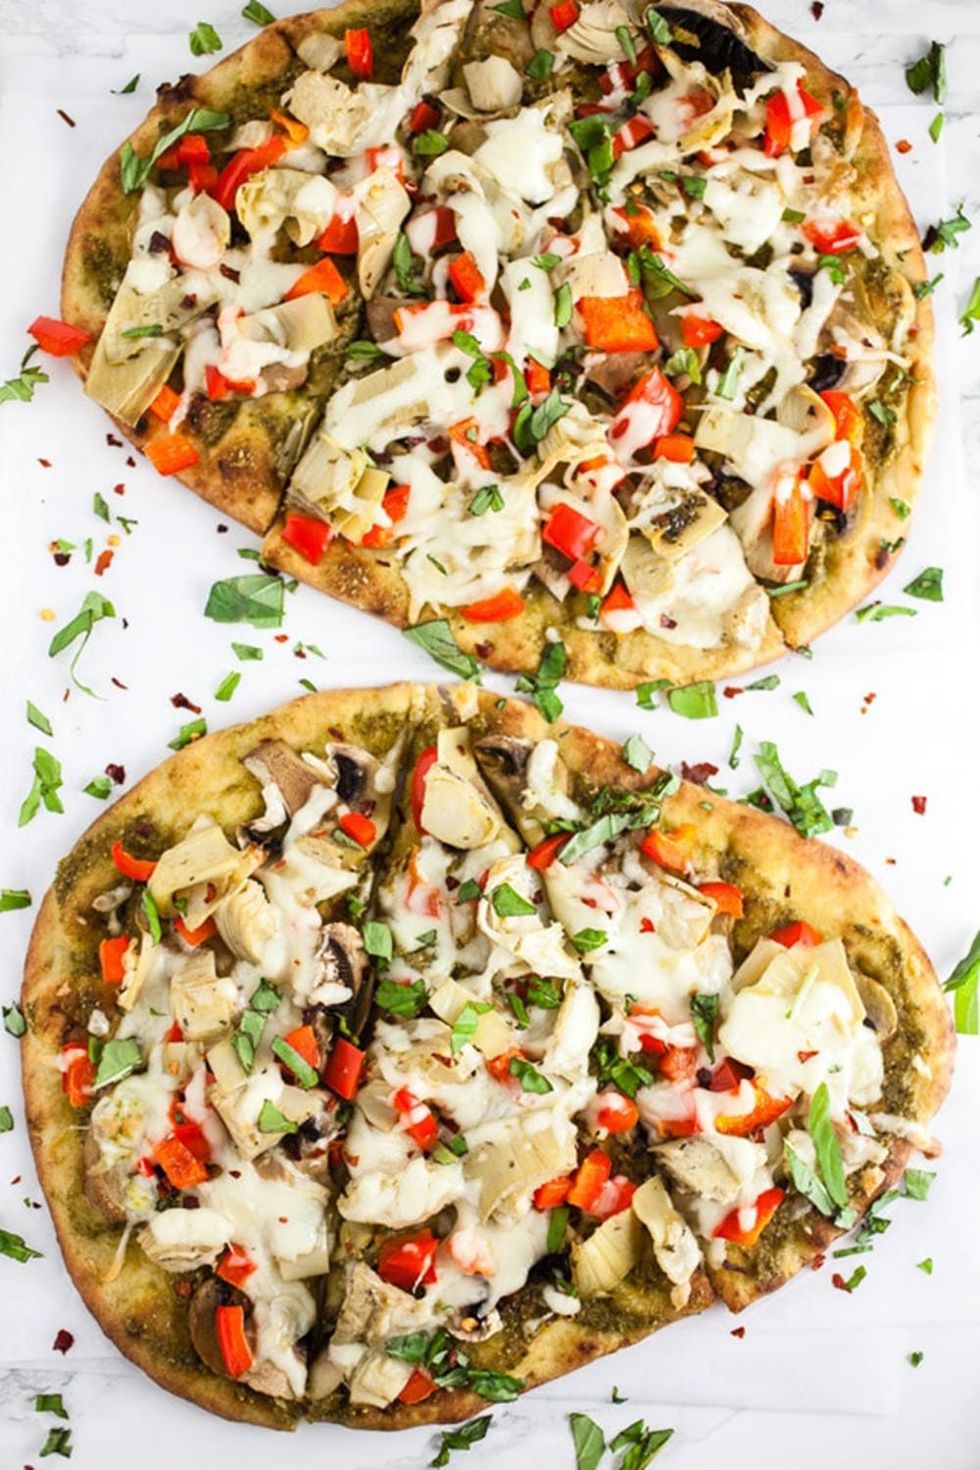 22 Naan Pizza Recipes That Make Speedy Weeknight Meals - Brit + Co